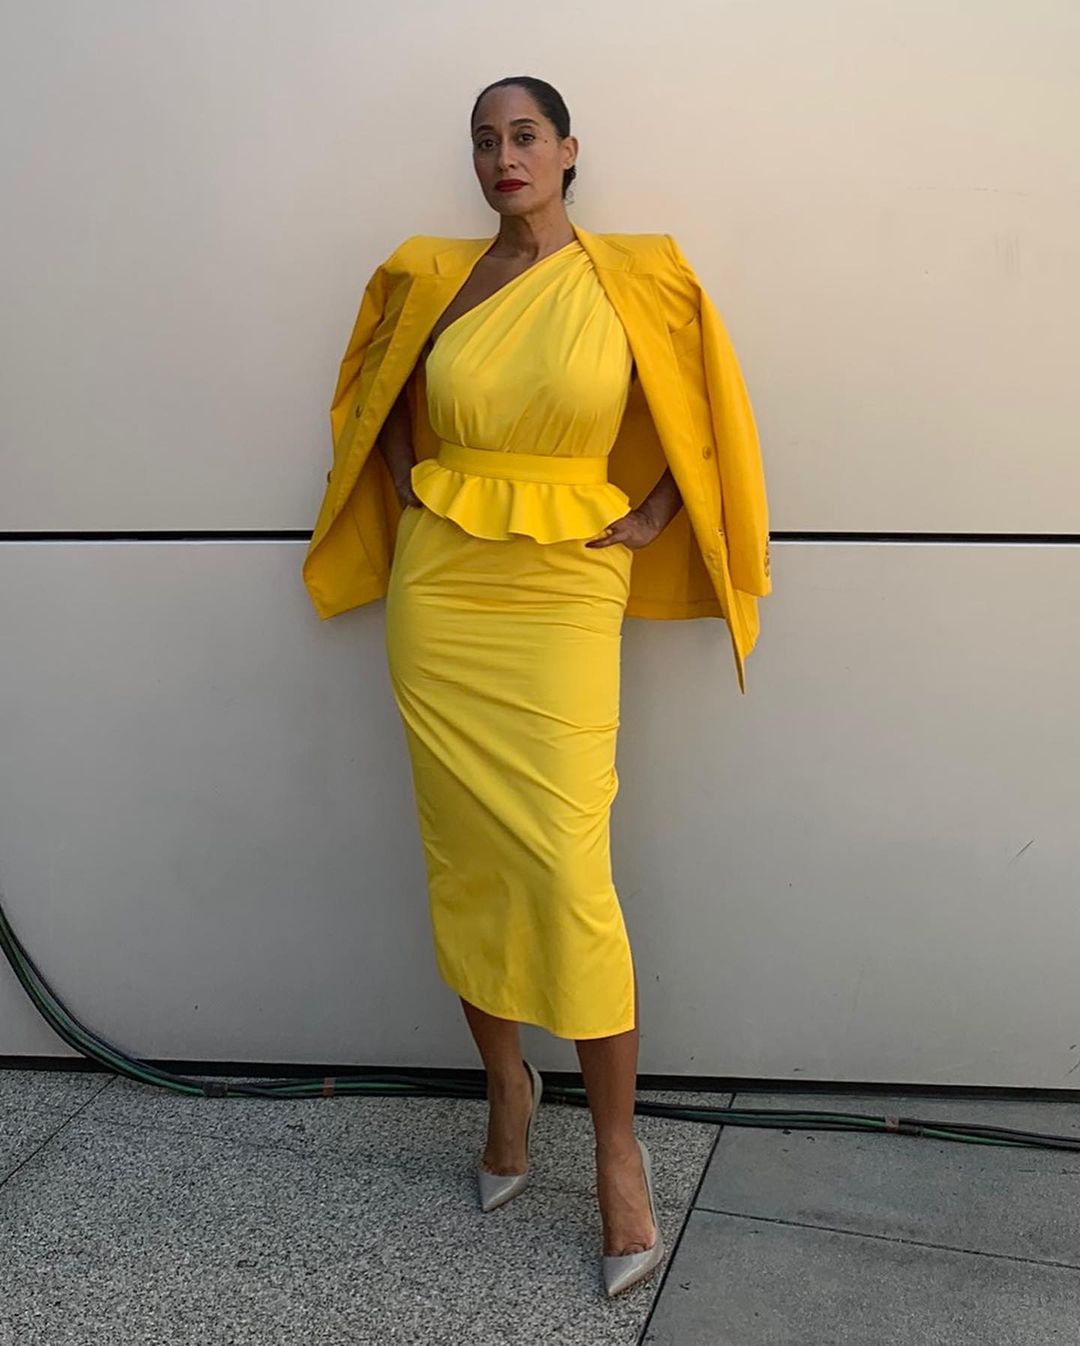 Tracee Ellis Ross Earned Her Fashion Icon Status – Here Are Her Best Style Moments